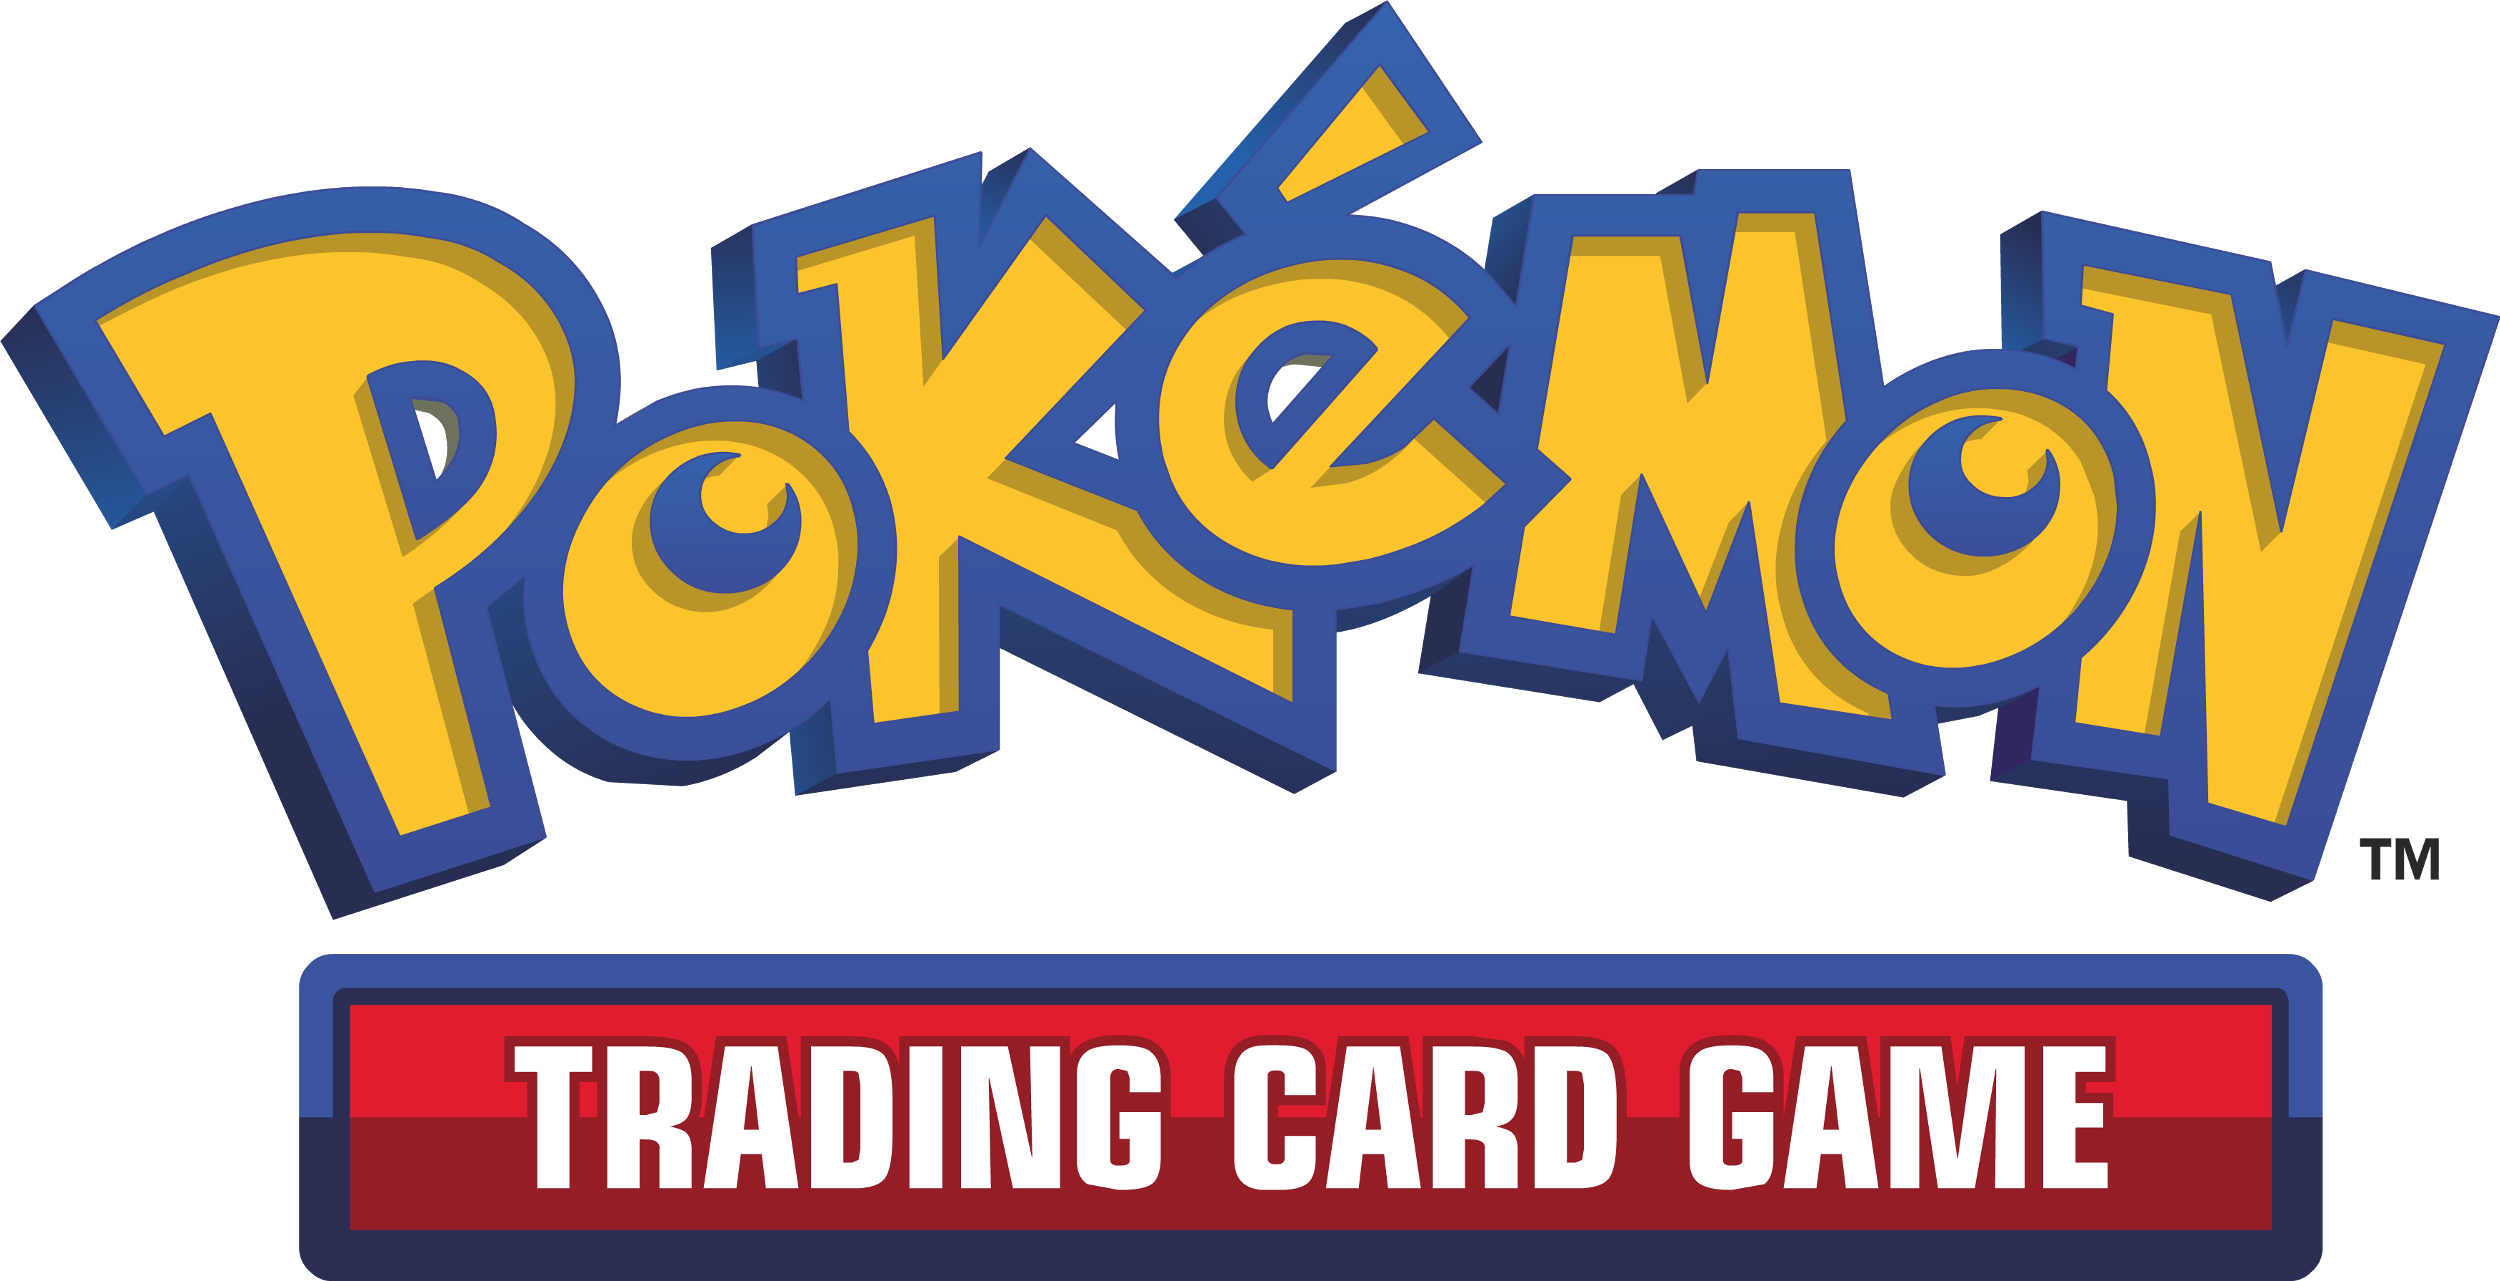 Pokémon Trading Card Game Out Now On Ipad In Canada